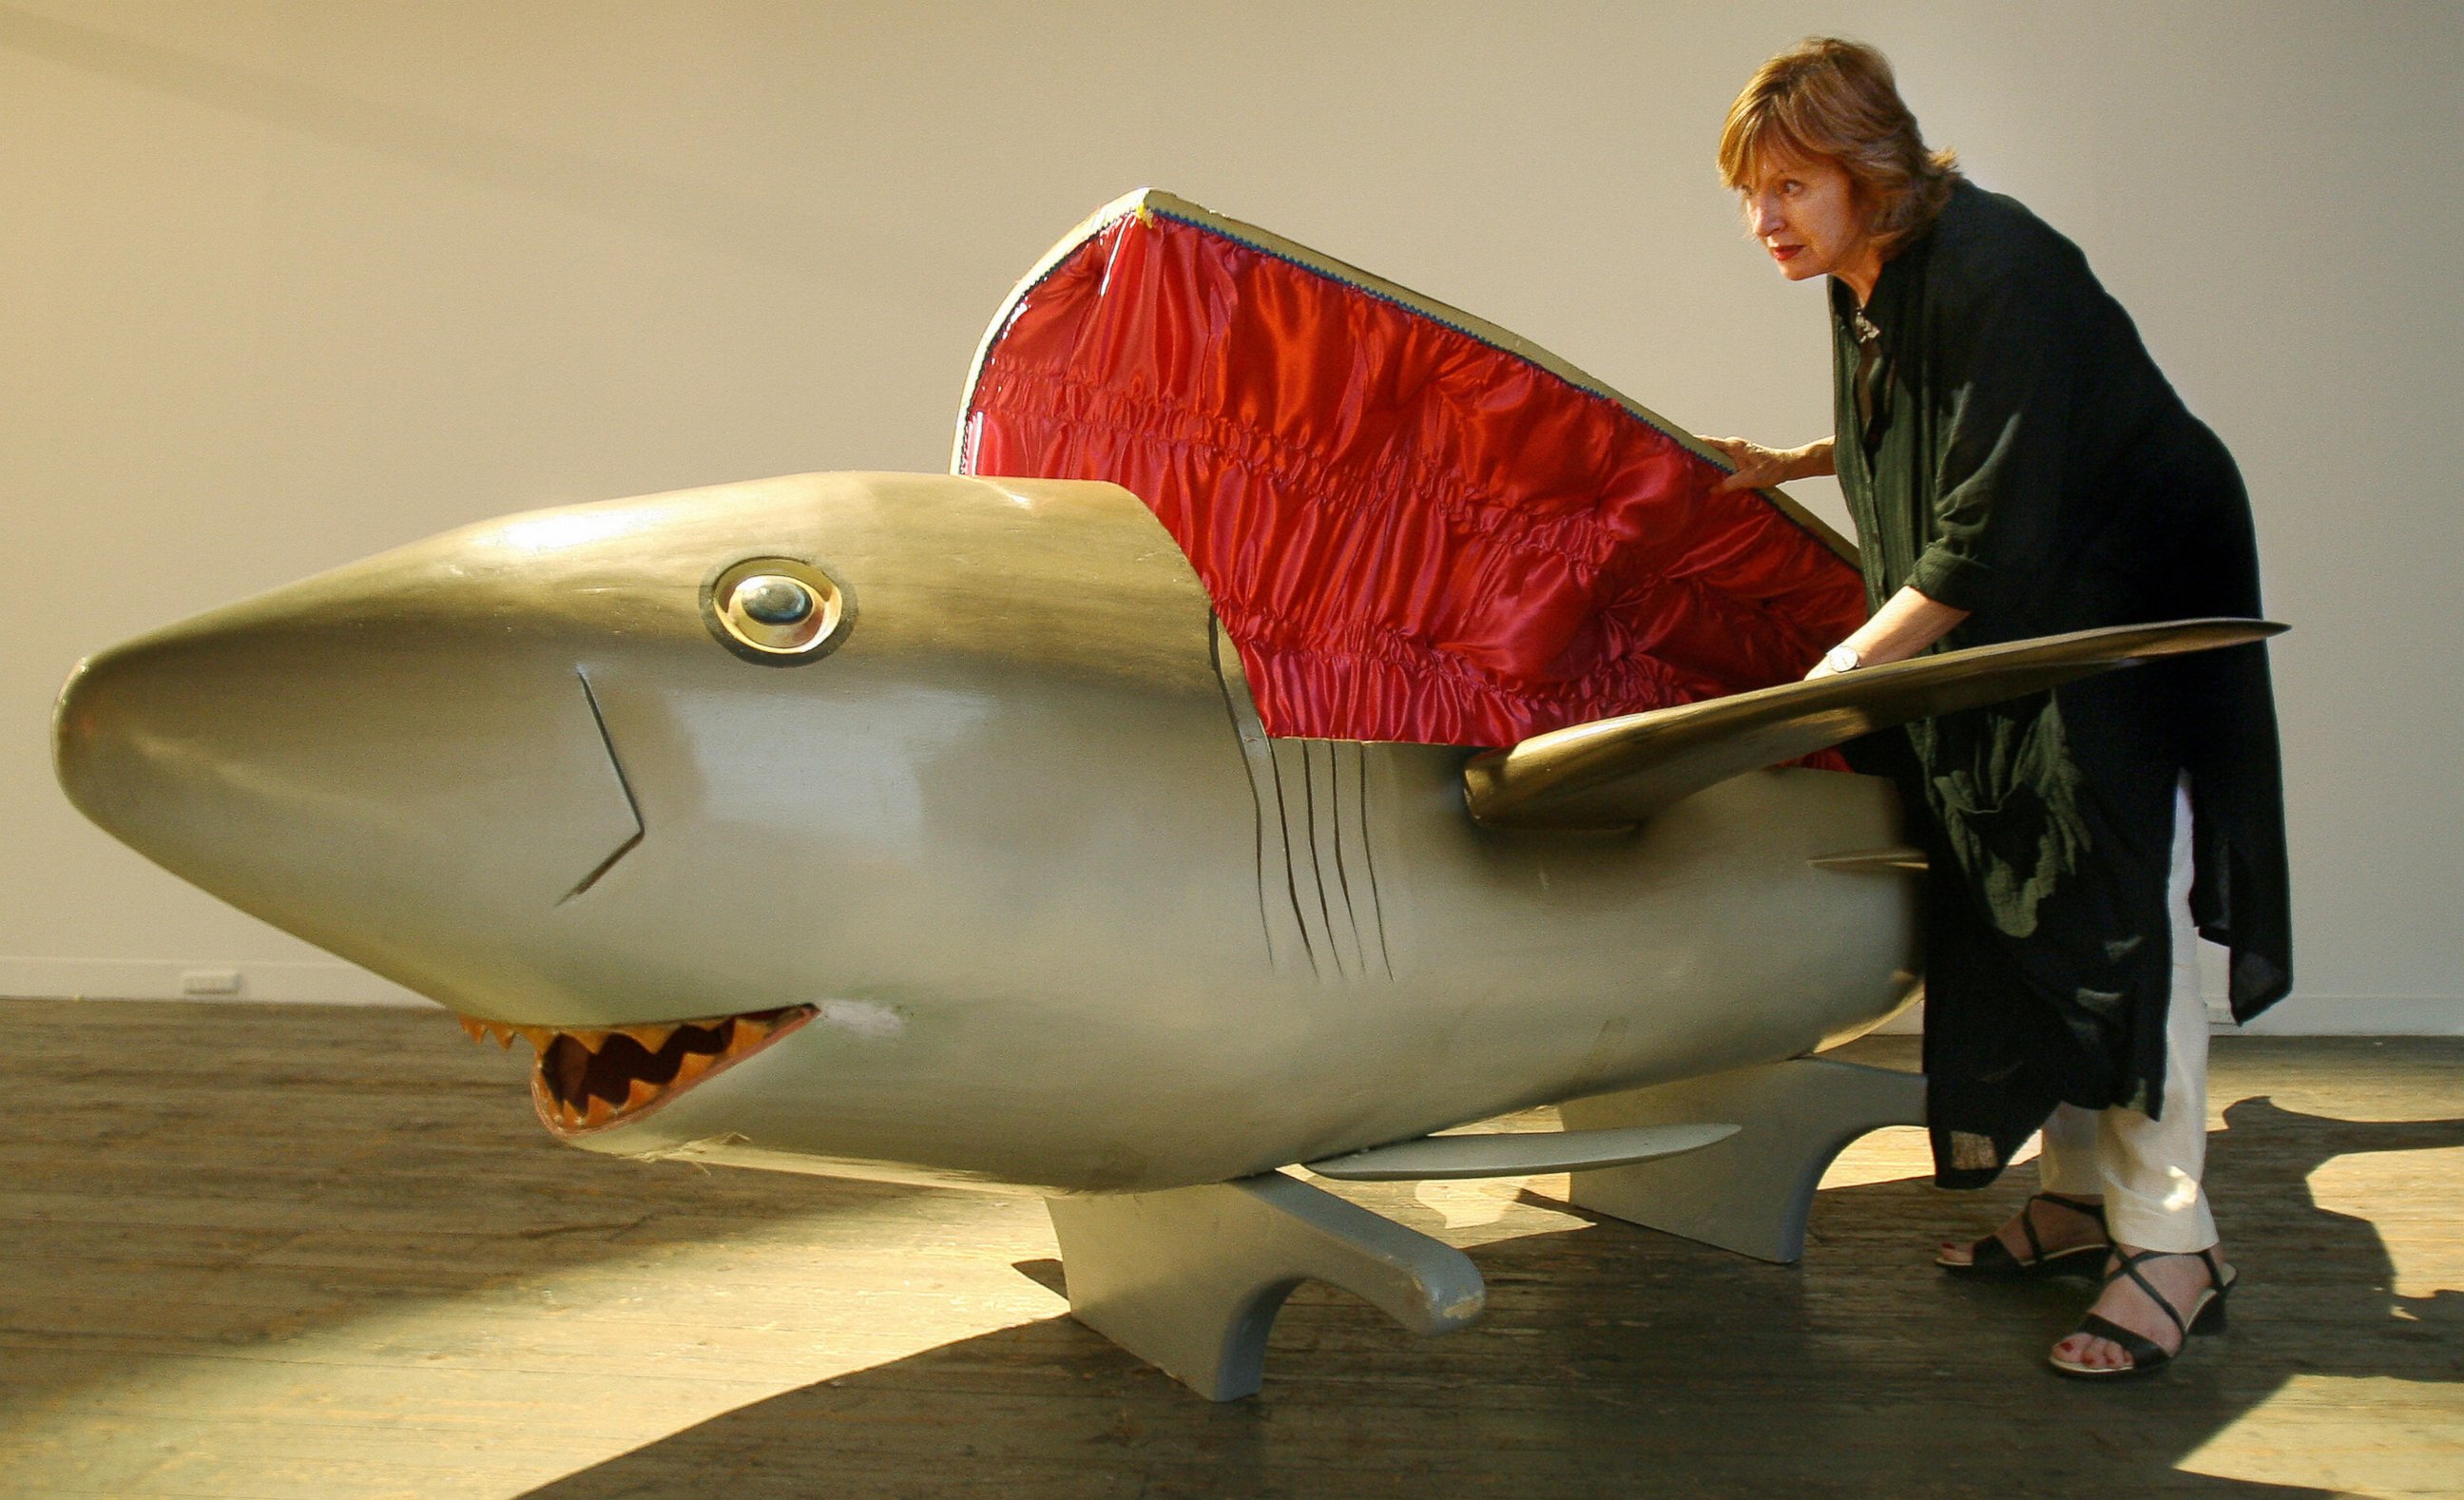 PHOTO: In this file photo, a gallery worker inspects a coffin carved in the shape of a shark by the Paa Joe Carpentry workshop in Ghana and commissioned for Festival Melbourne2006, in Melbourne, Australia on Mar. 9, 2006.  